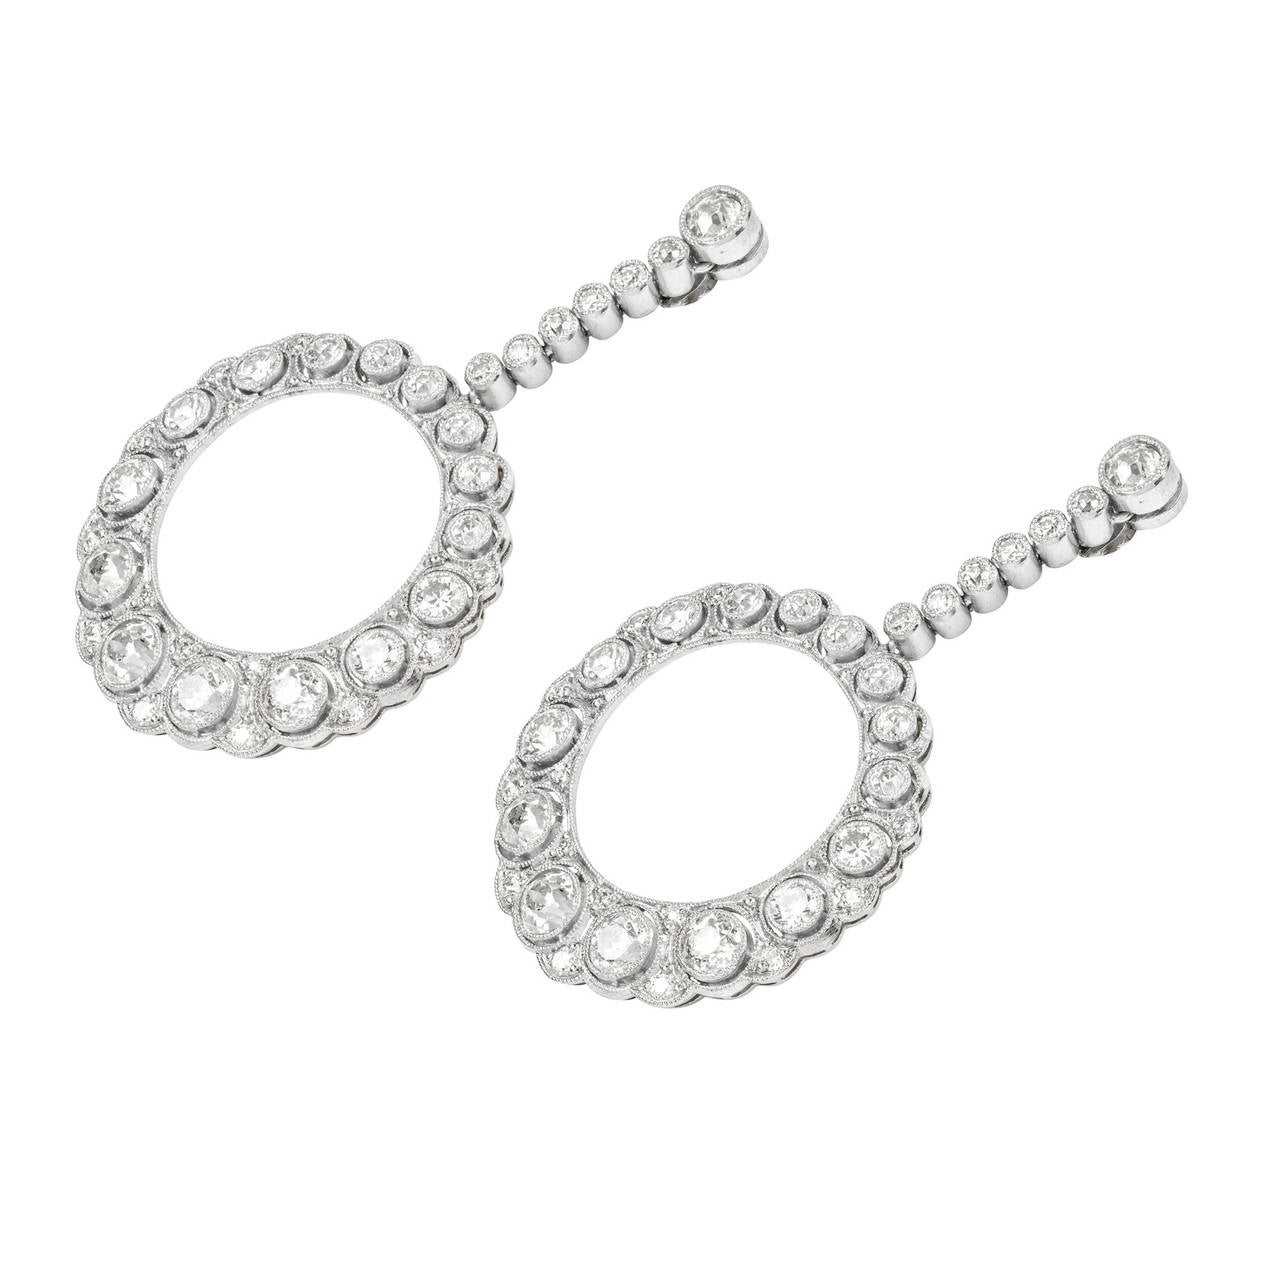 A pair of early 20th-century diamond-set hoop drop earrings, each earring consisting a graduated pierced hoop set with old brilliant-cut diamonds suspended from six diamonds and an old brilliant-cut diamond top, estimated to weigh a total of 2